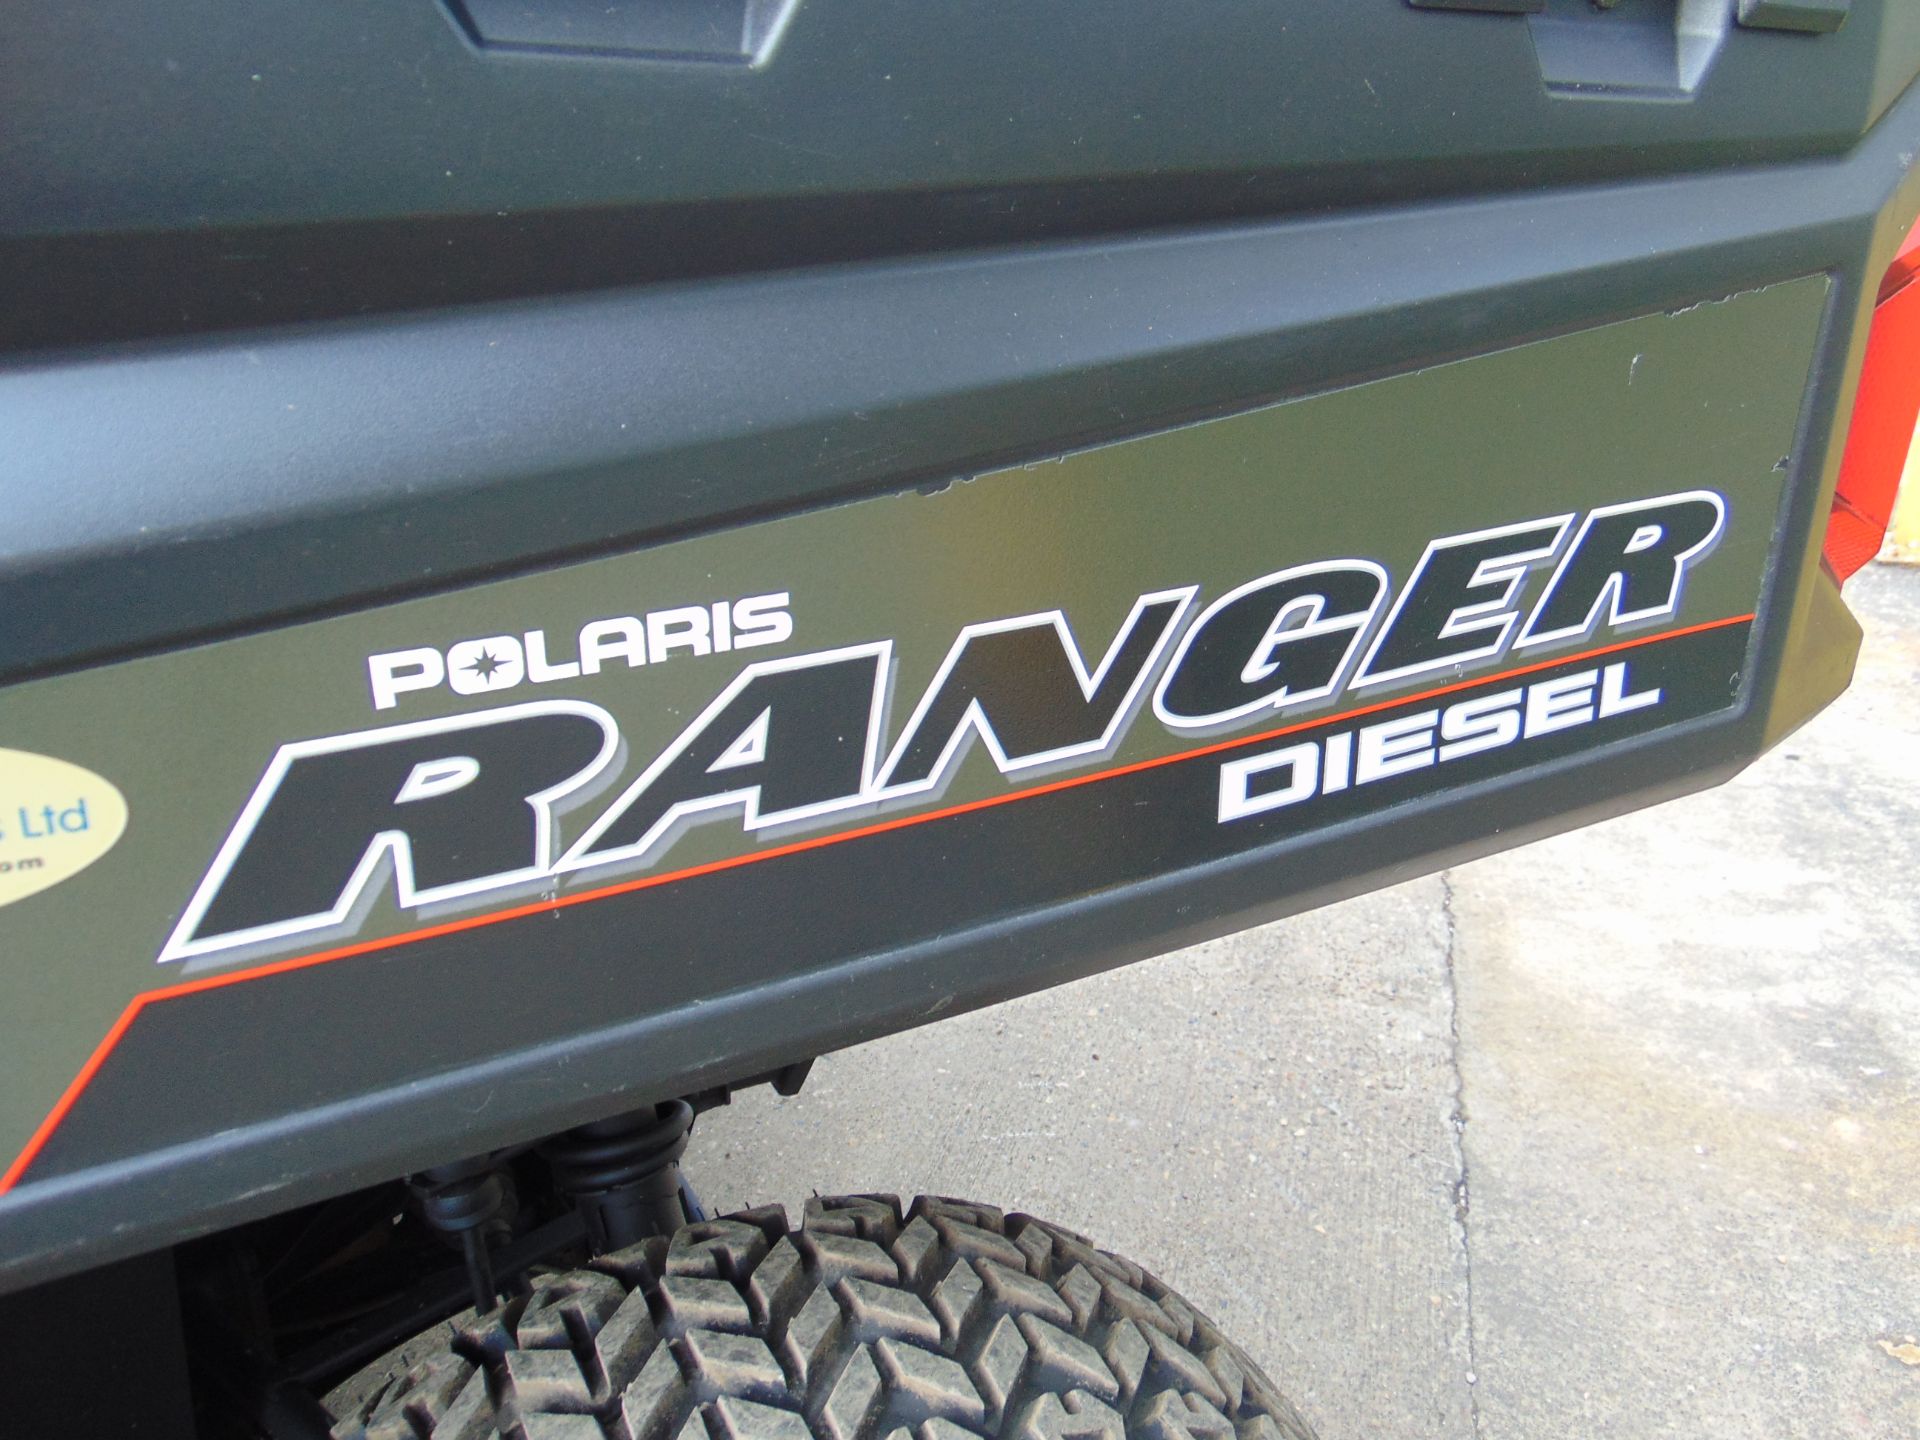 Polaris Ranger Crew Cab Diesel Utility Vehicle 1,190 Hrs only from Govt Dept - Image 14 of 25